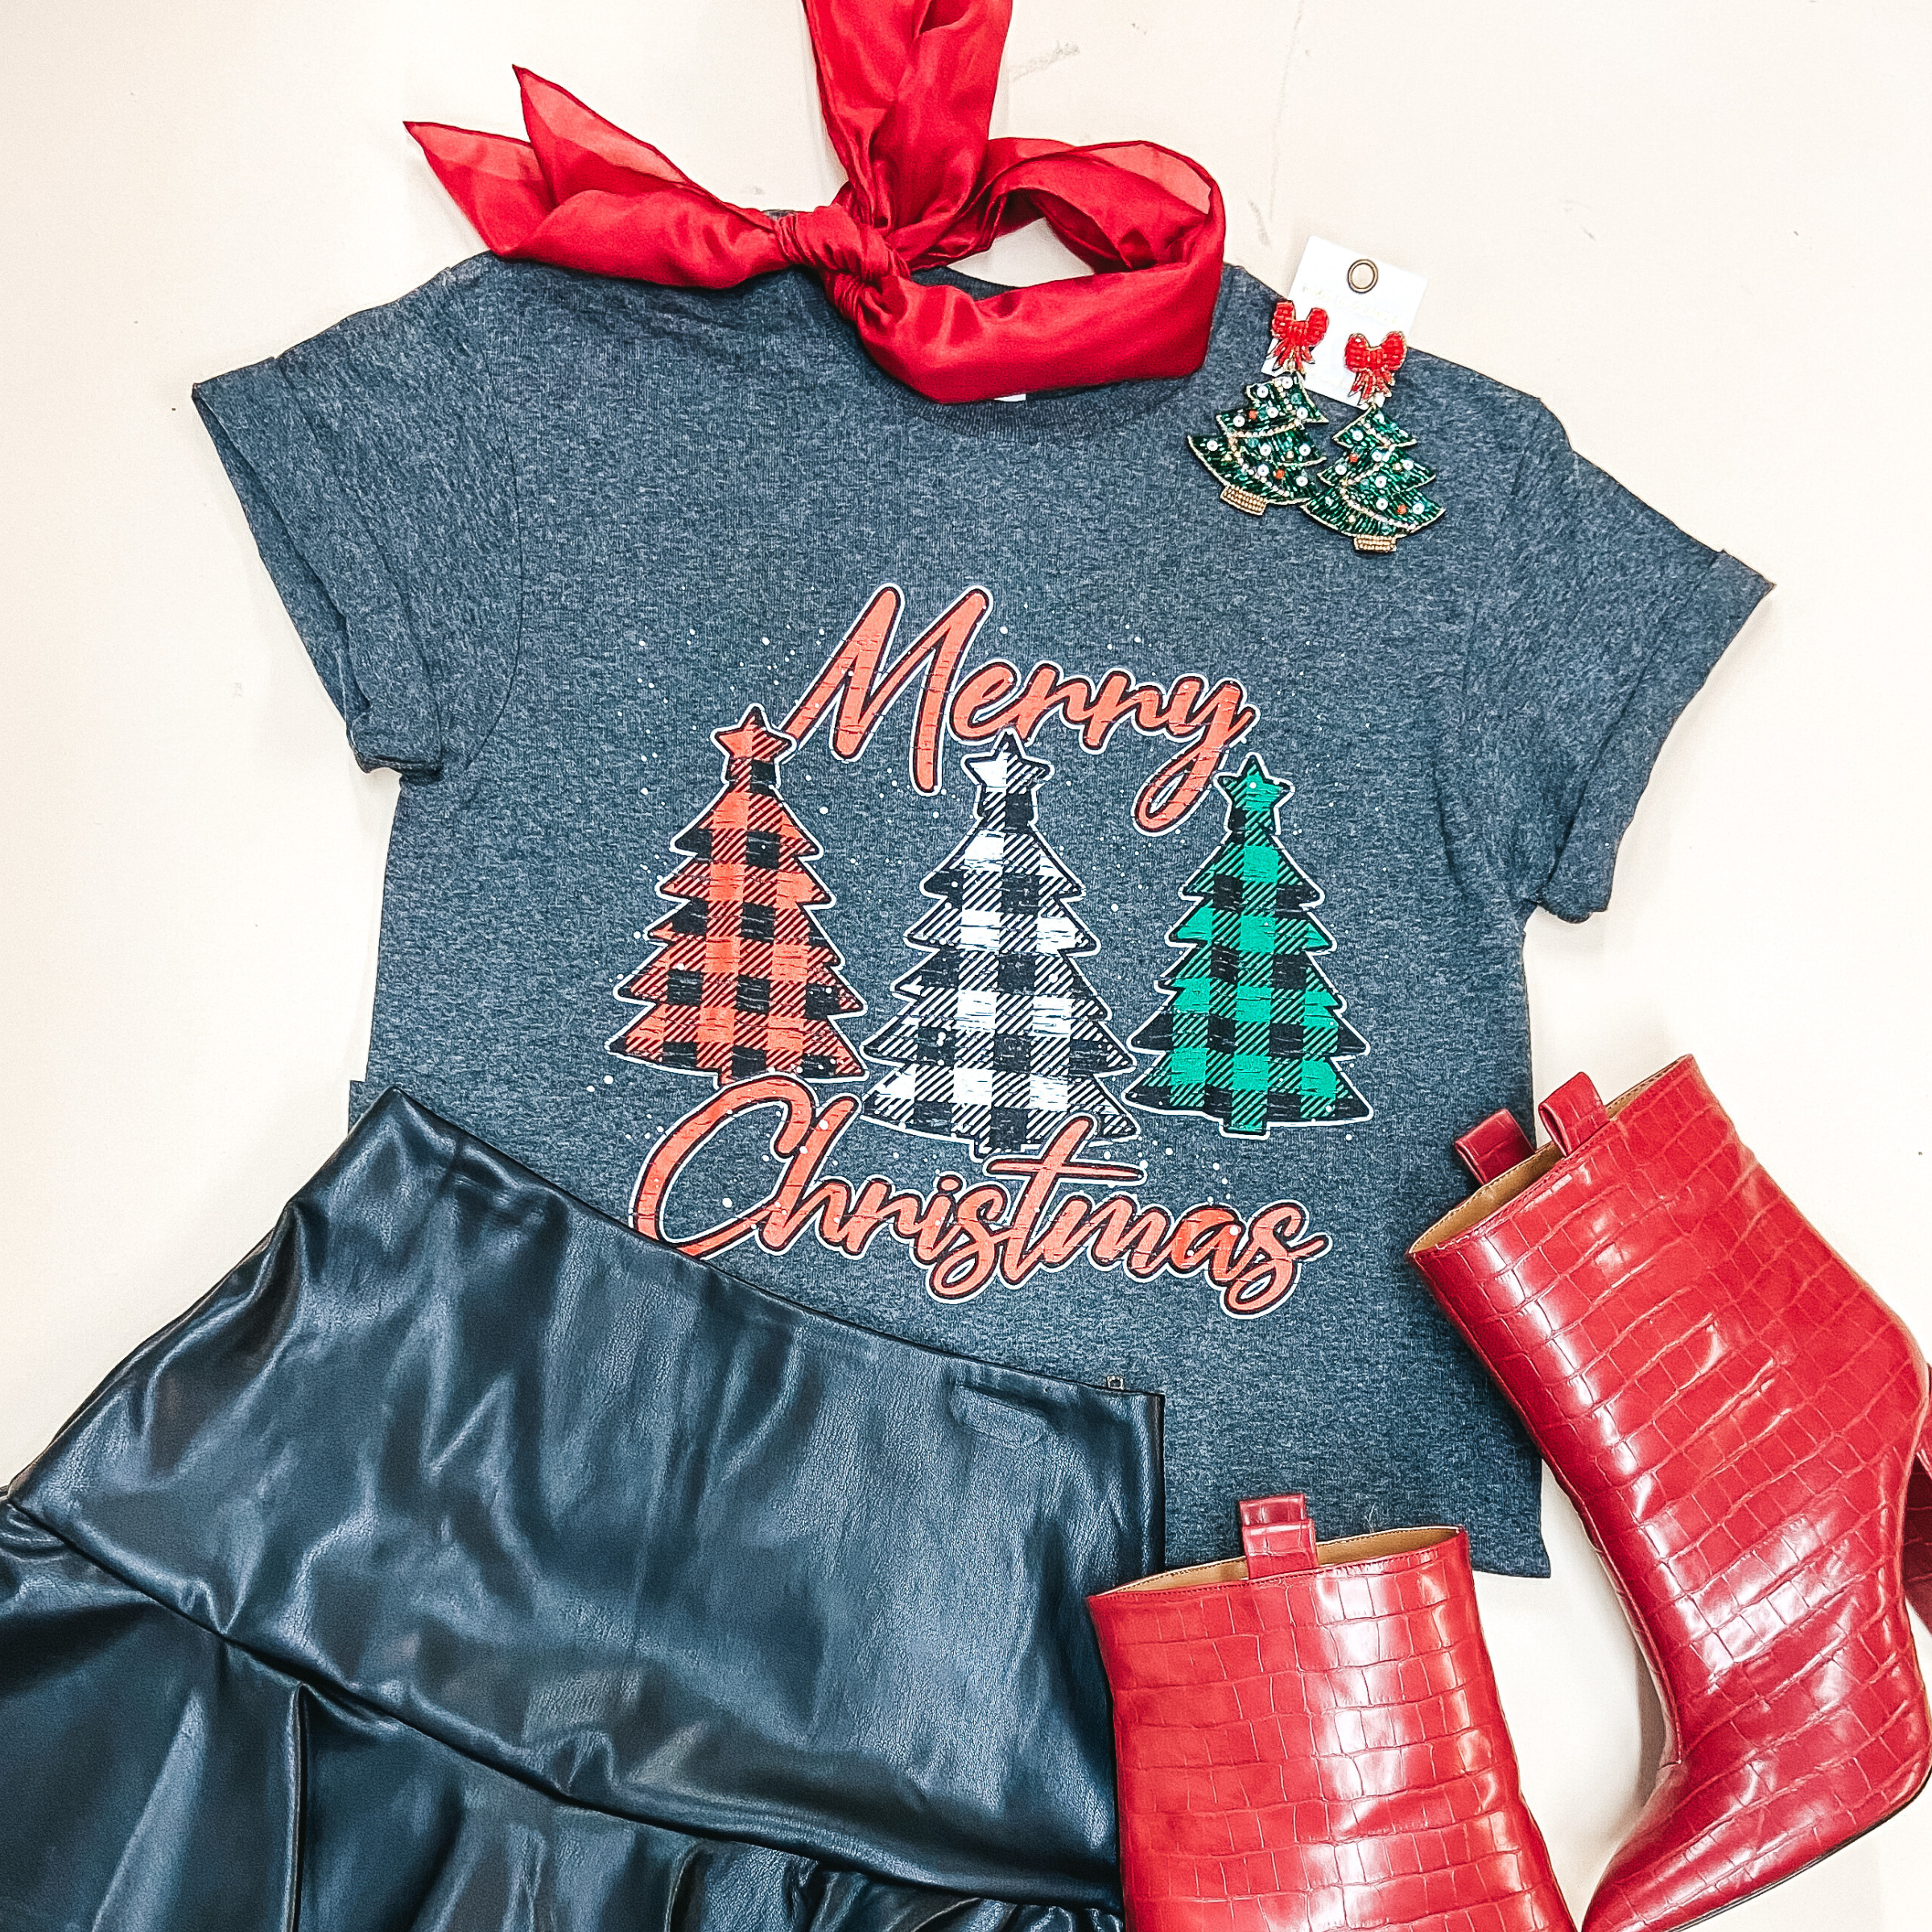 A heather grey short sleeve tee shirt with a plaid Christmas tree graphic that says "Merry Christmas" in red letters. Pictured with red booties, a red wild rag, and a black faux leather skirt.